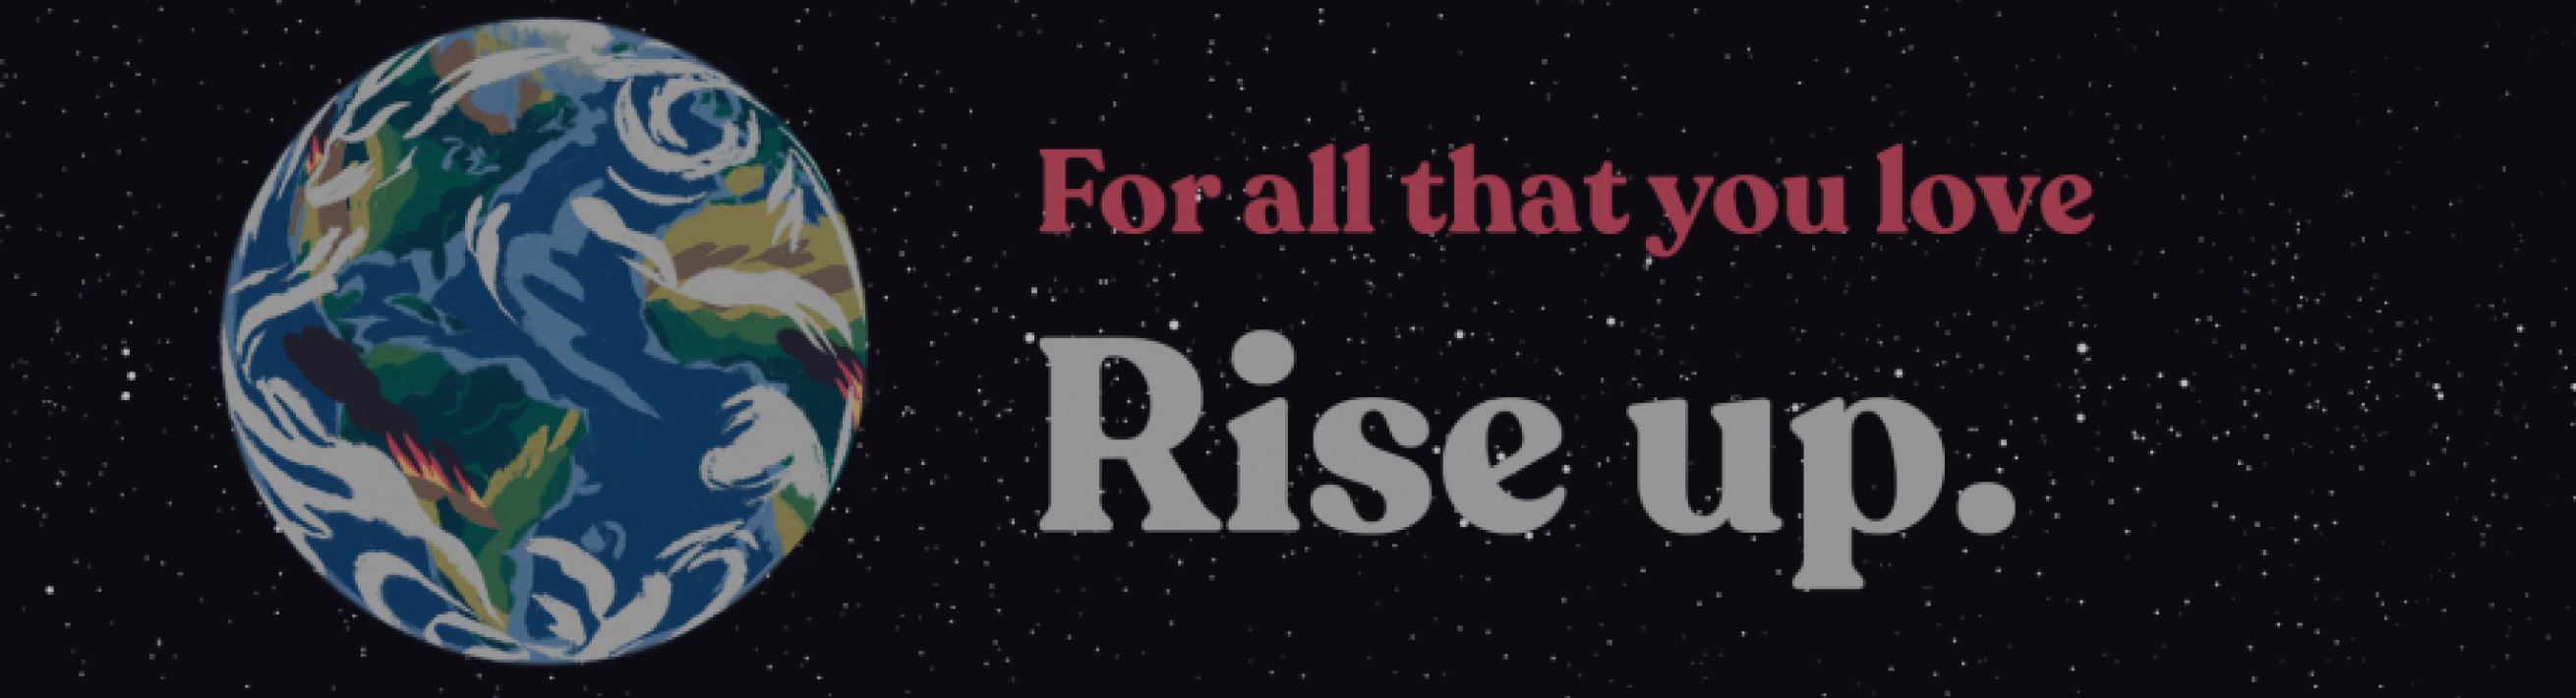 For all that you love, Rise Up.